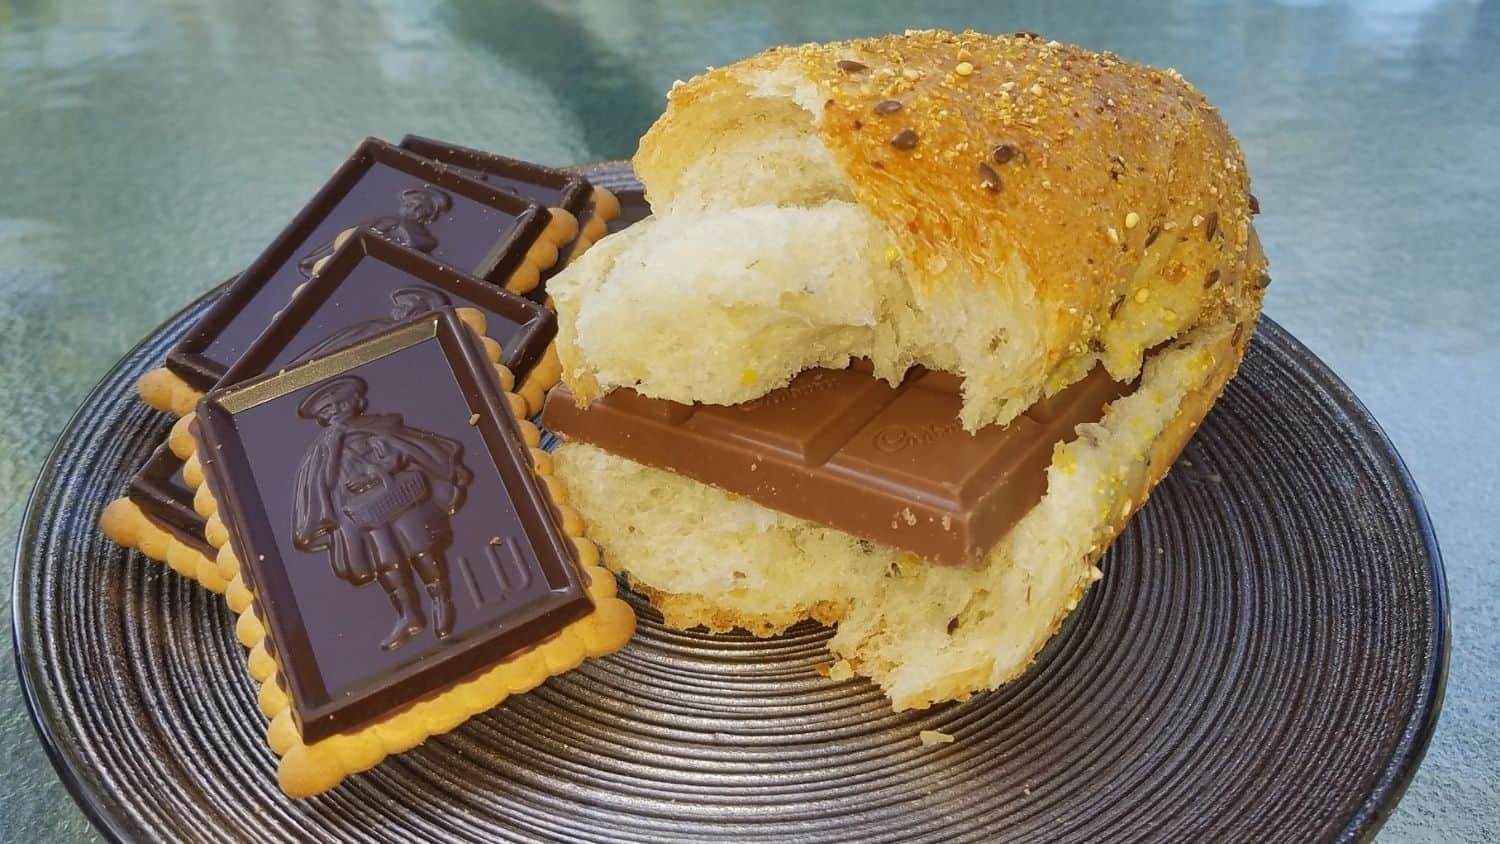 Le Goûter, or French Treat Time (RECIPE)